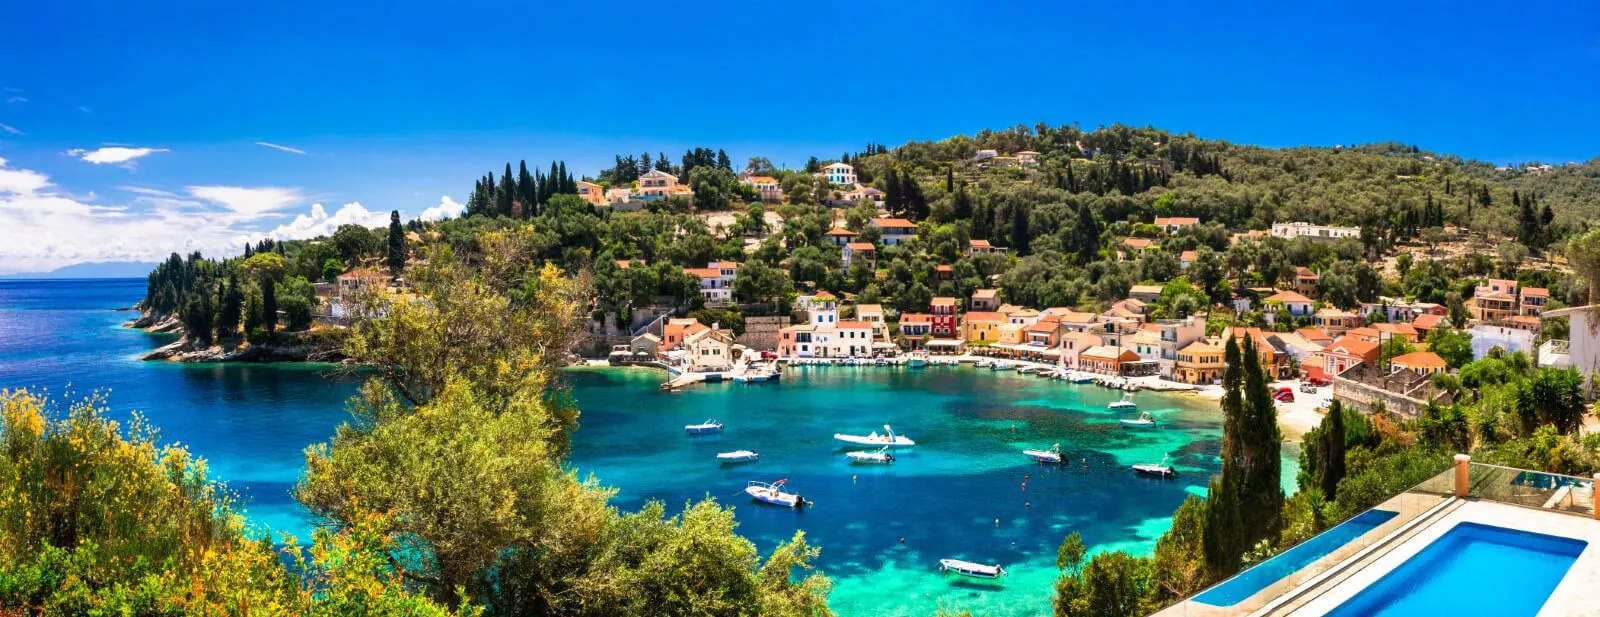 Traditional seafront village in Paxos, Greece